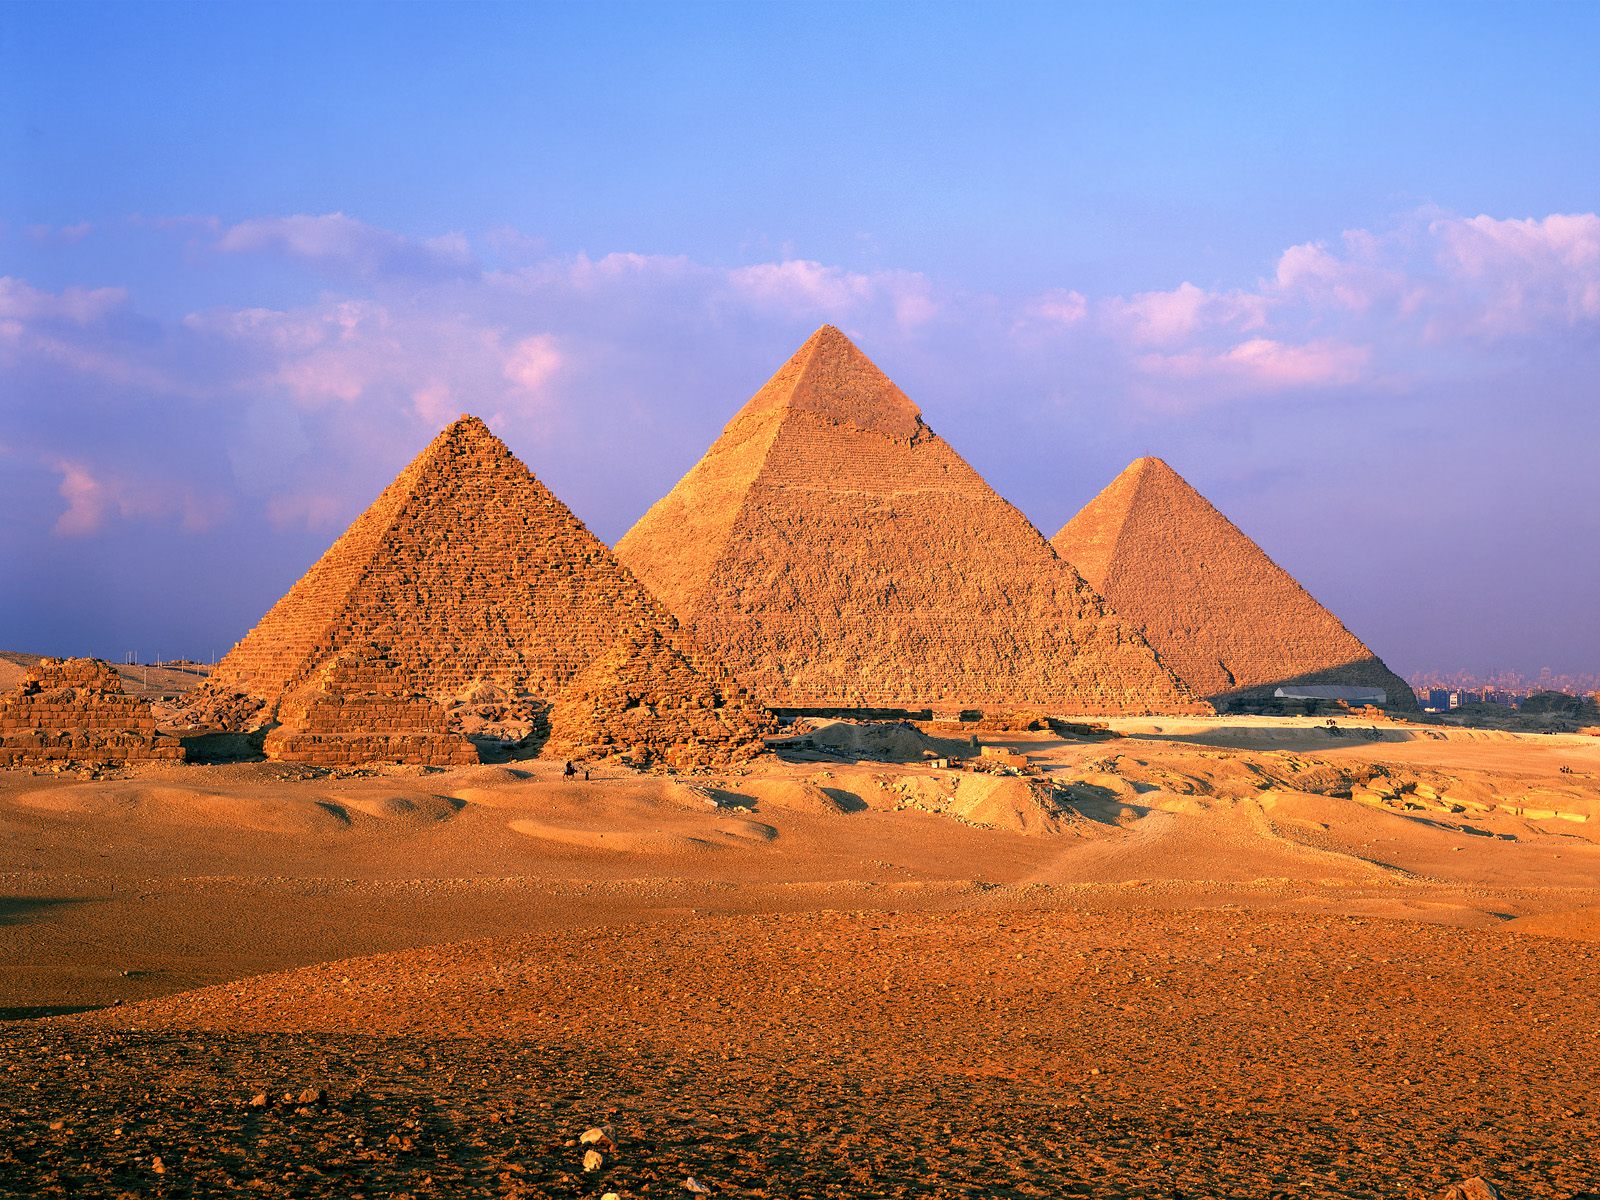 10 interesting facts about the Great Pyramid of Giza | AncientWorldWonders